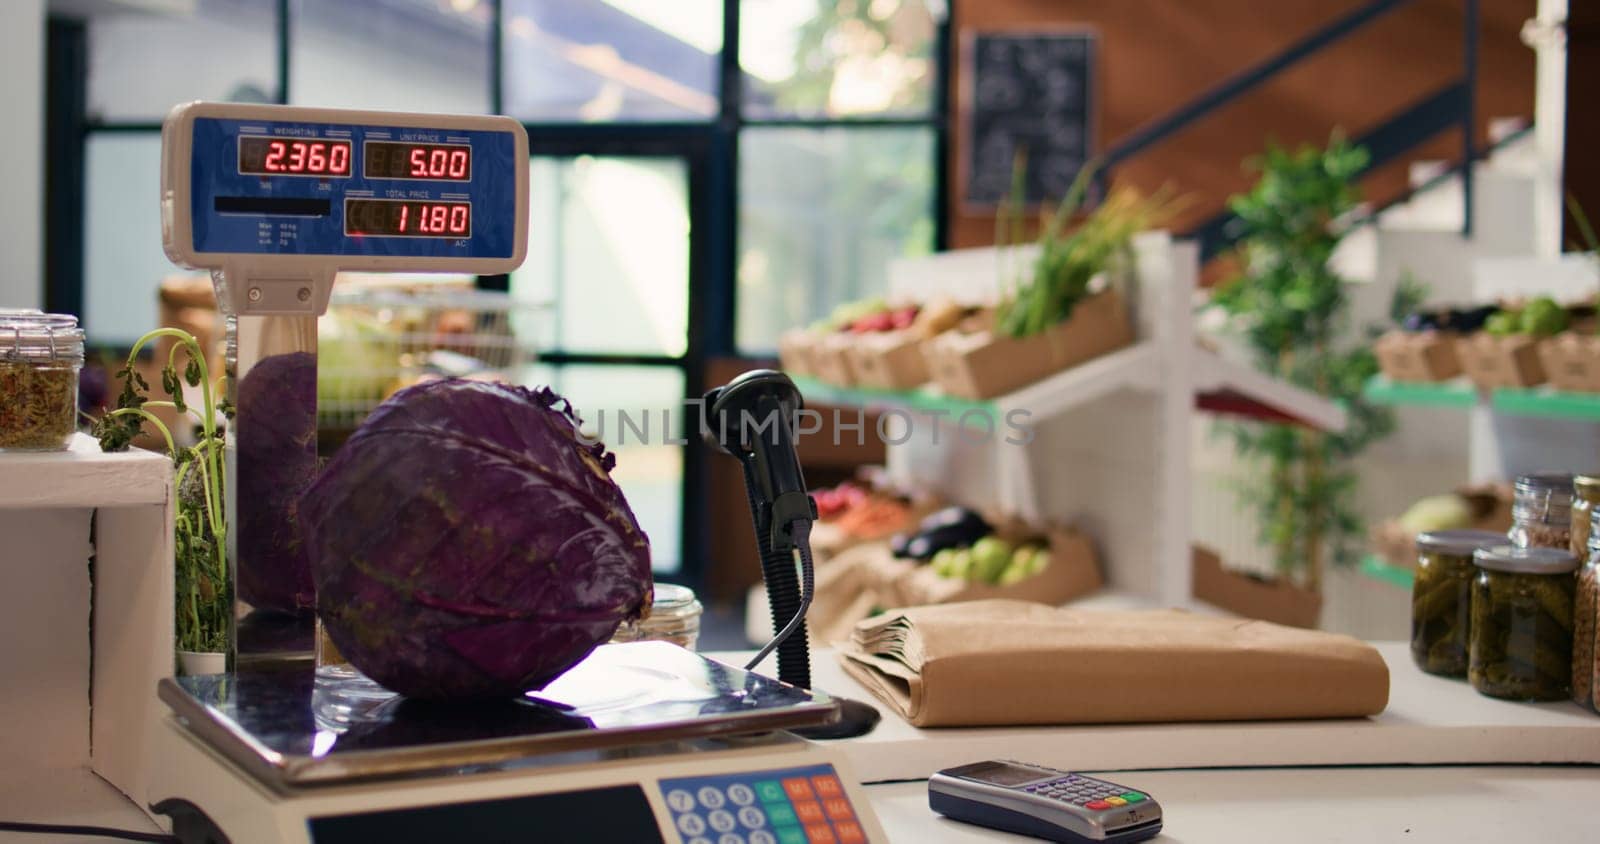 Electronic scale in eco friendly store next to organic locally grown produce. Modern weighing machine used in local neighborhood shop for bulk products and fruits or vegetables.